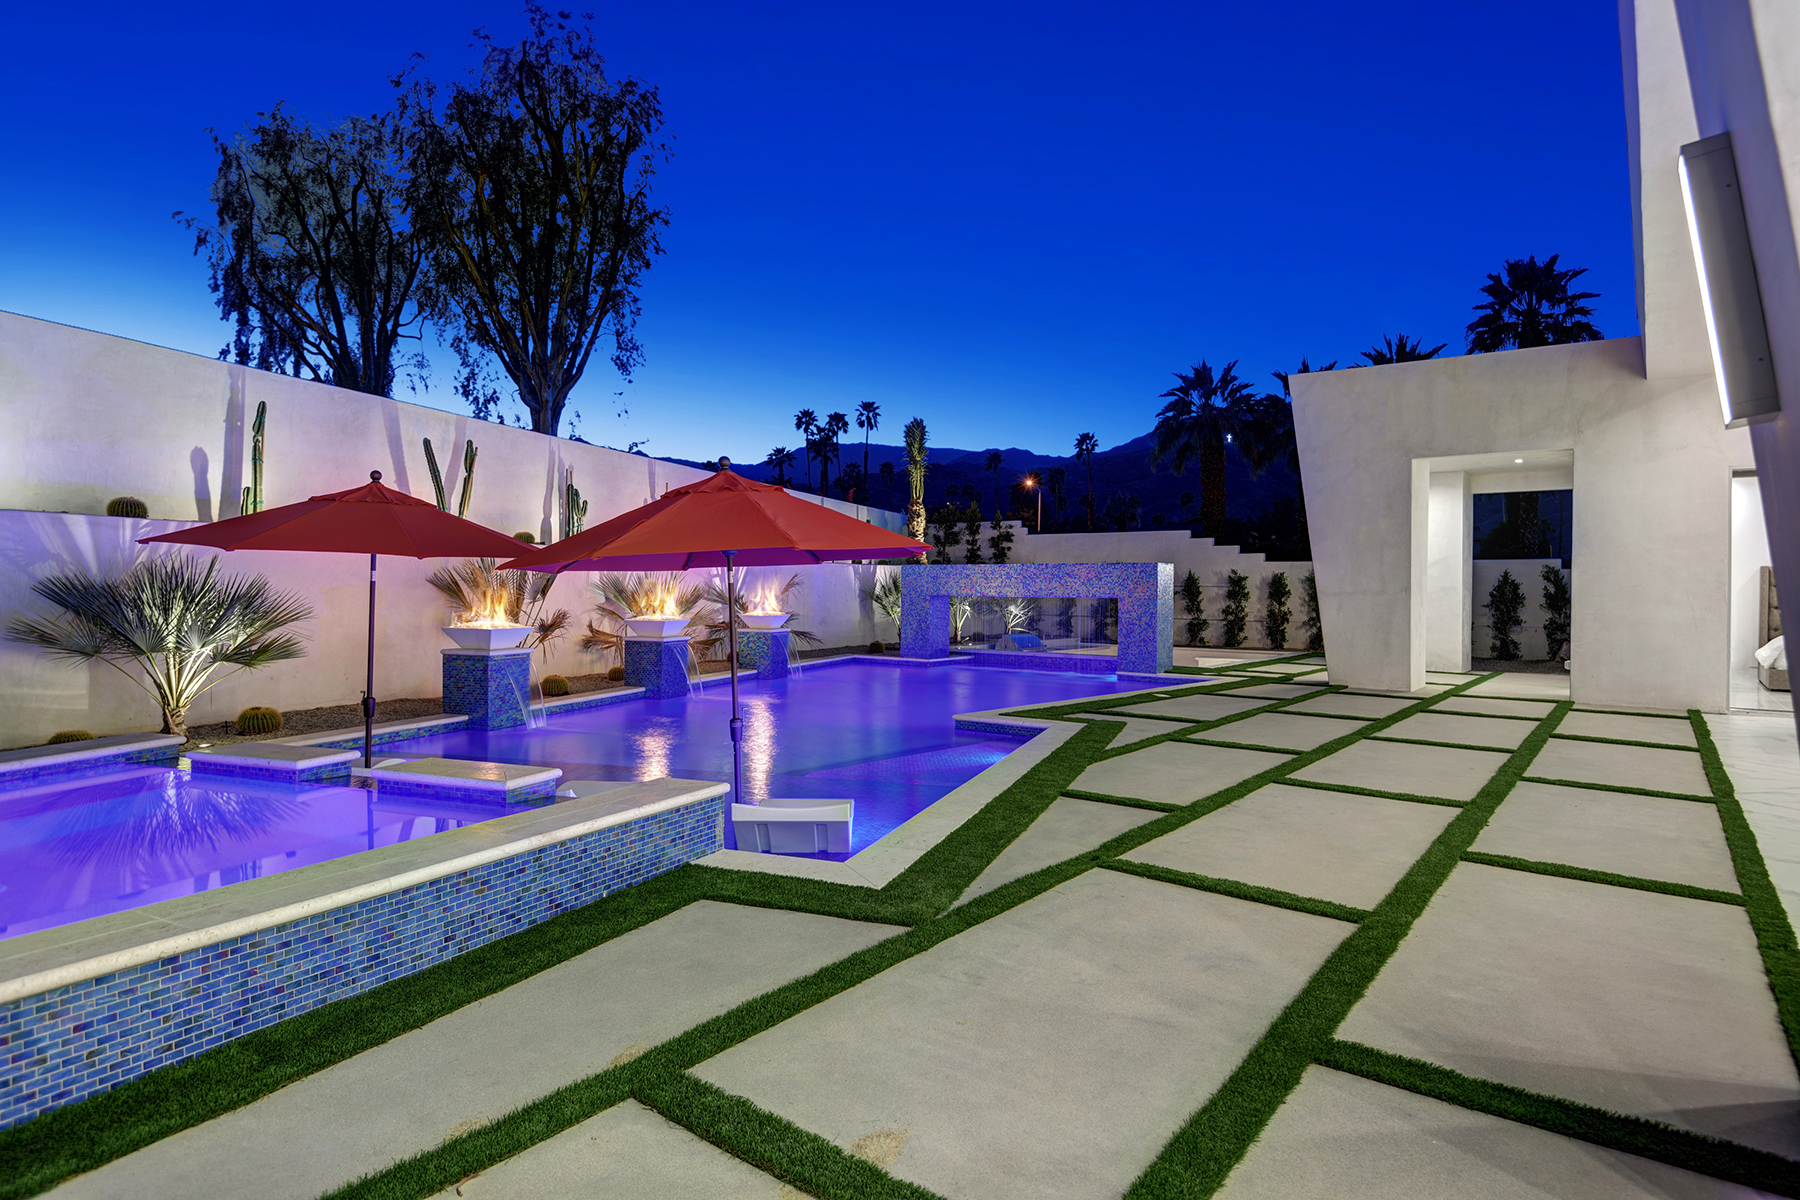 BACK YARD POOL AND SPA TO MOUNTAINS NIGHT MLS.jpg